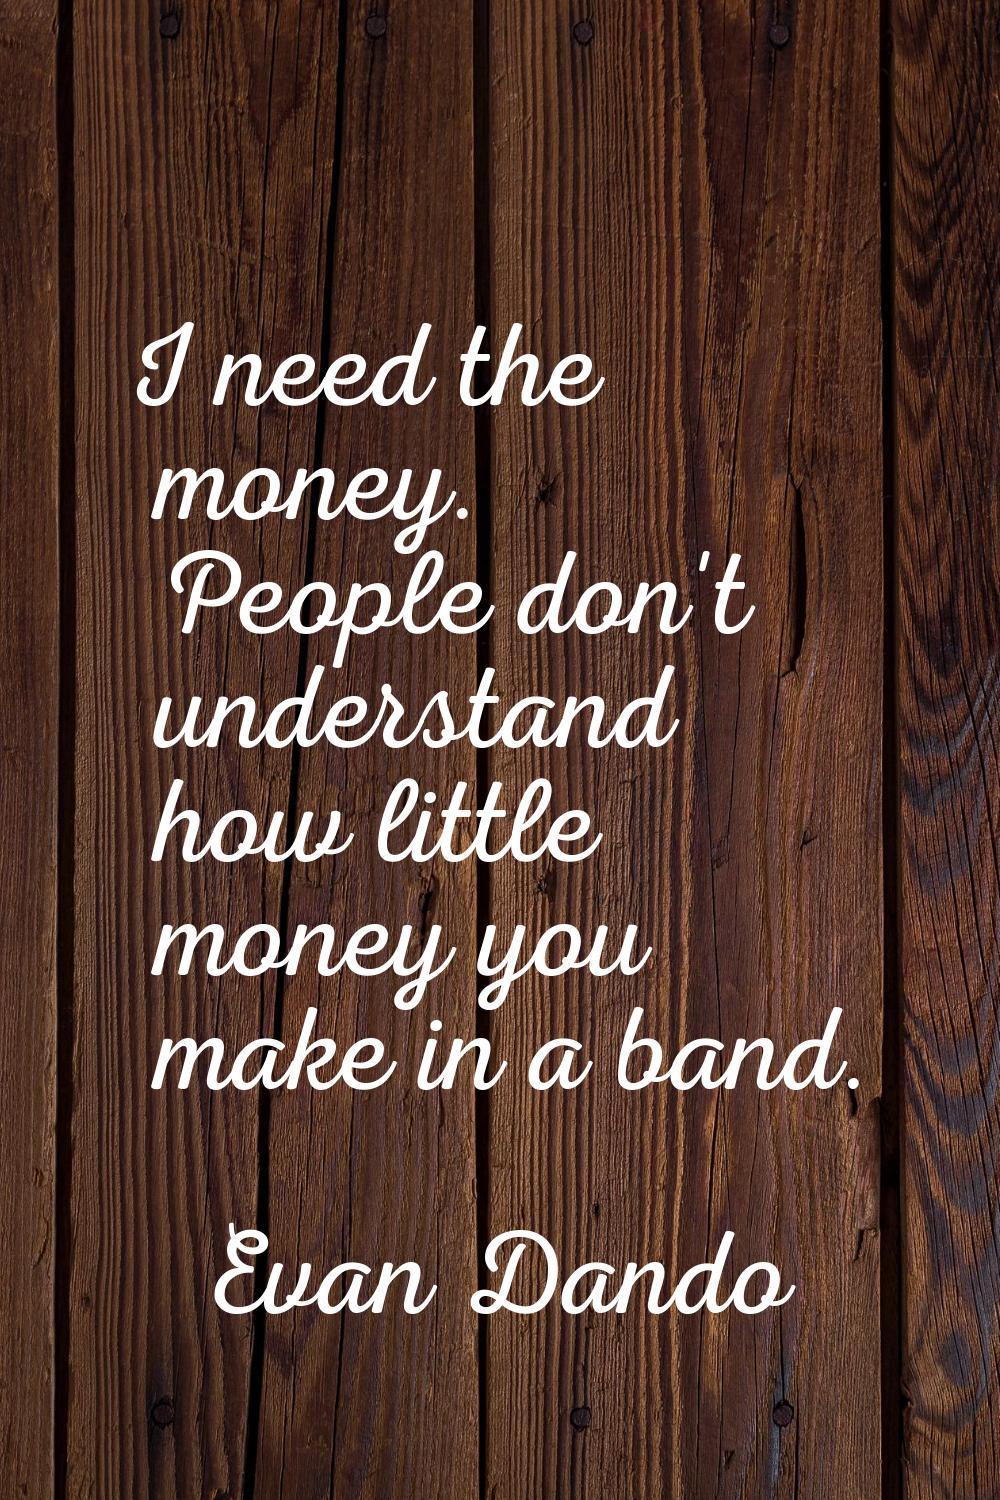 I need the money. People don't understand how little money you make in a band.